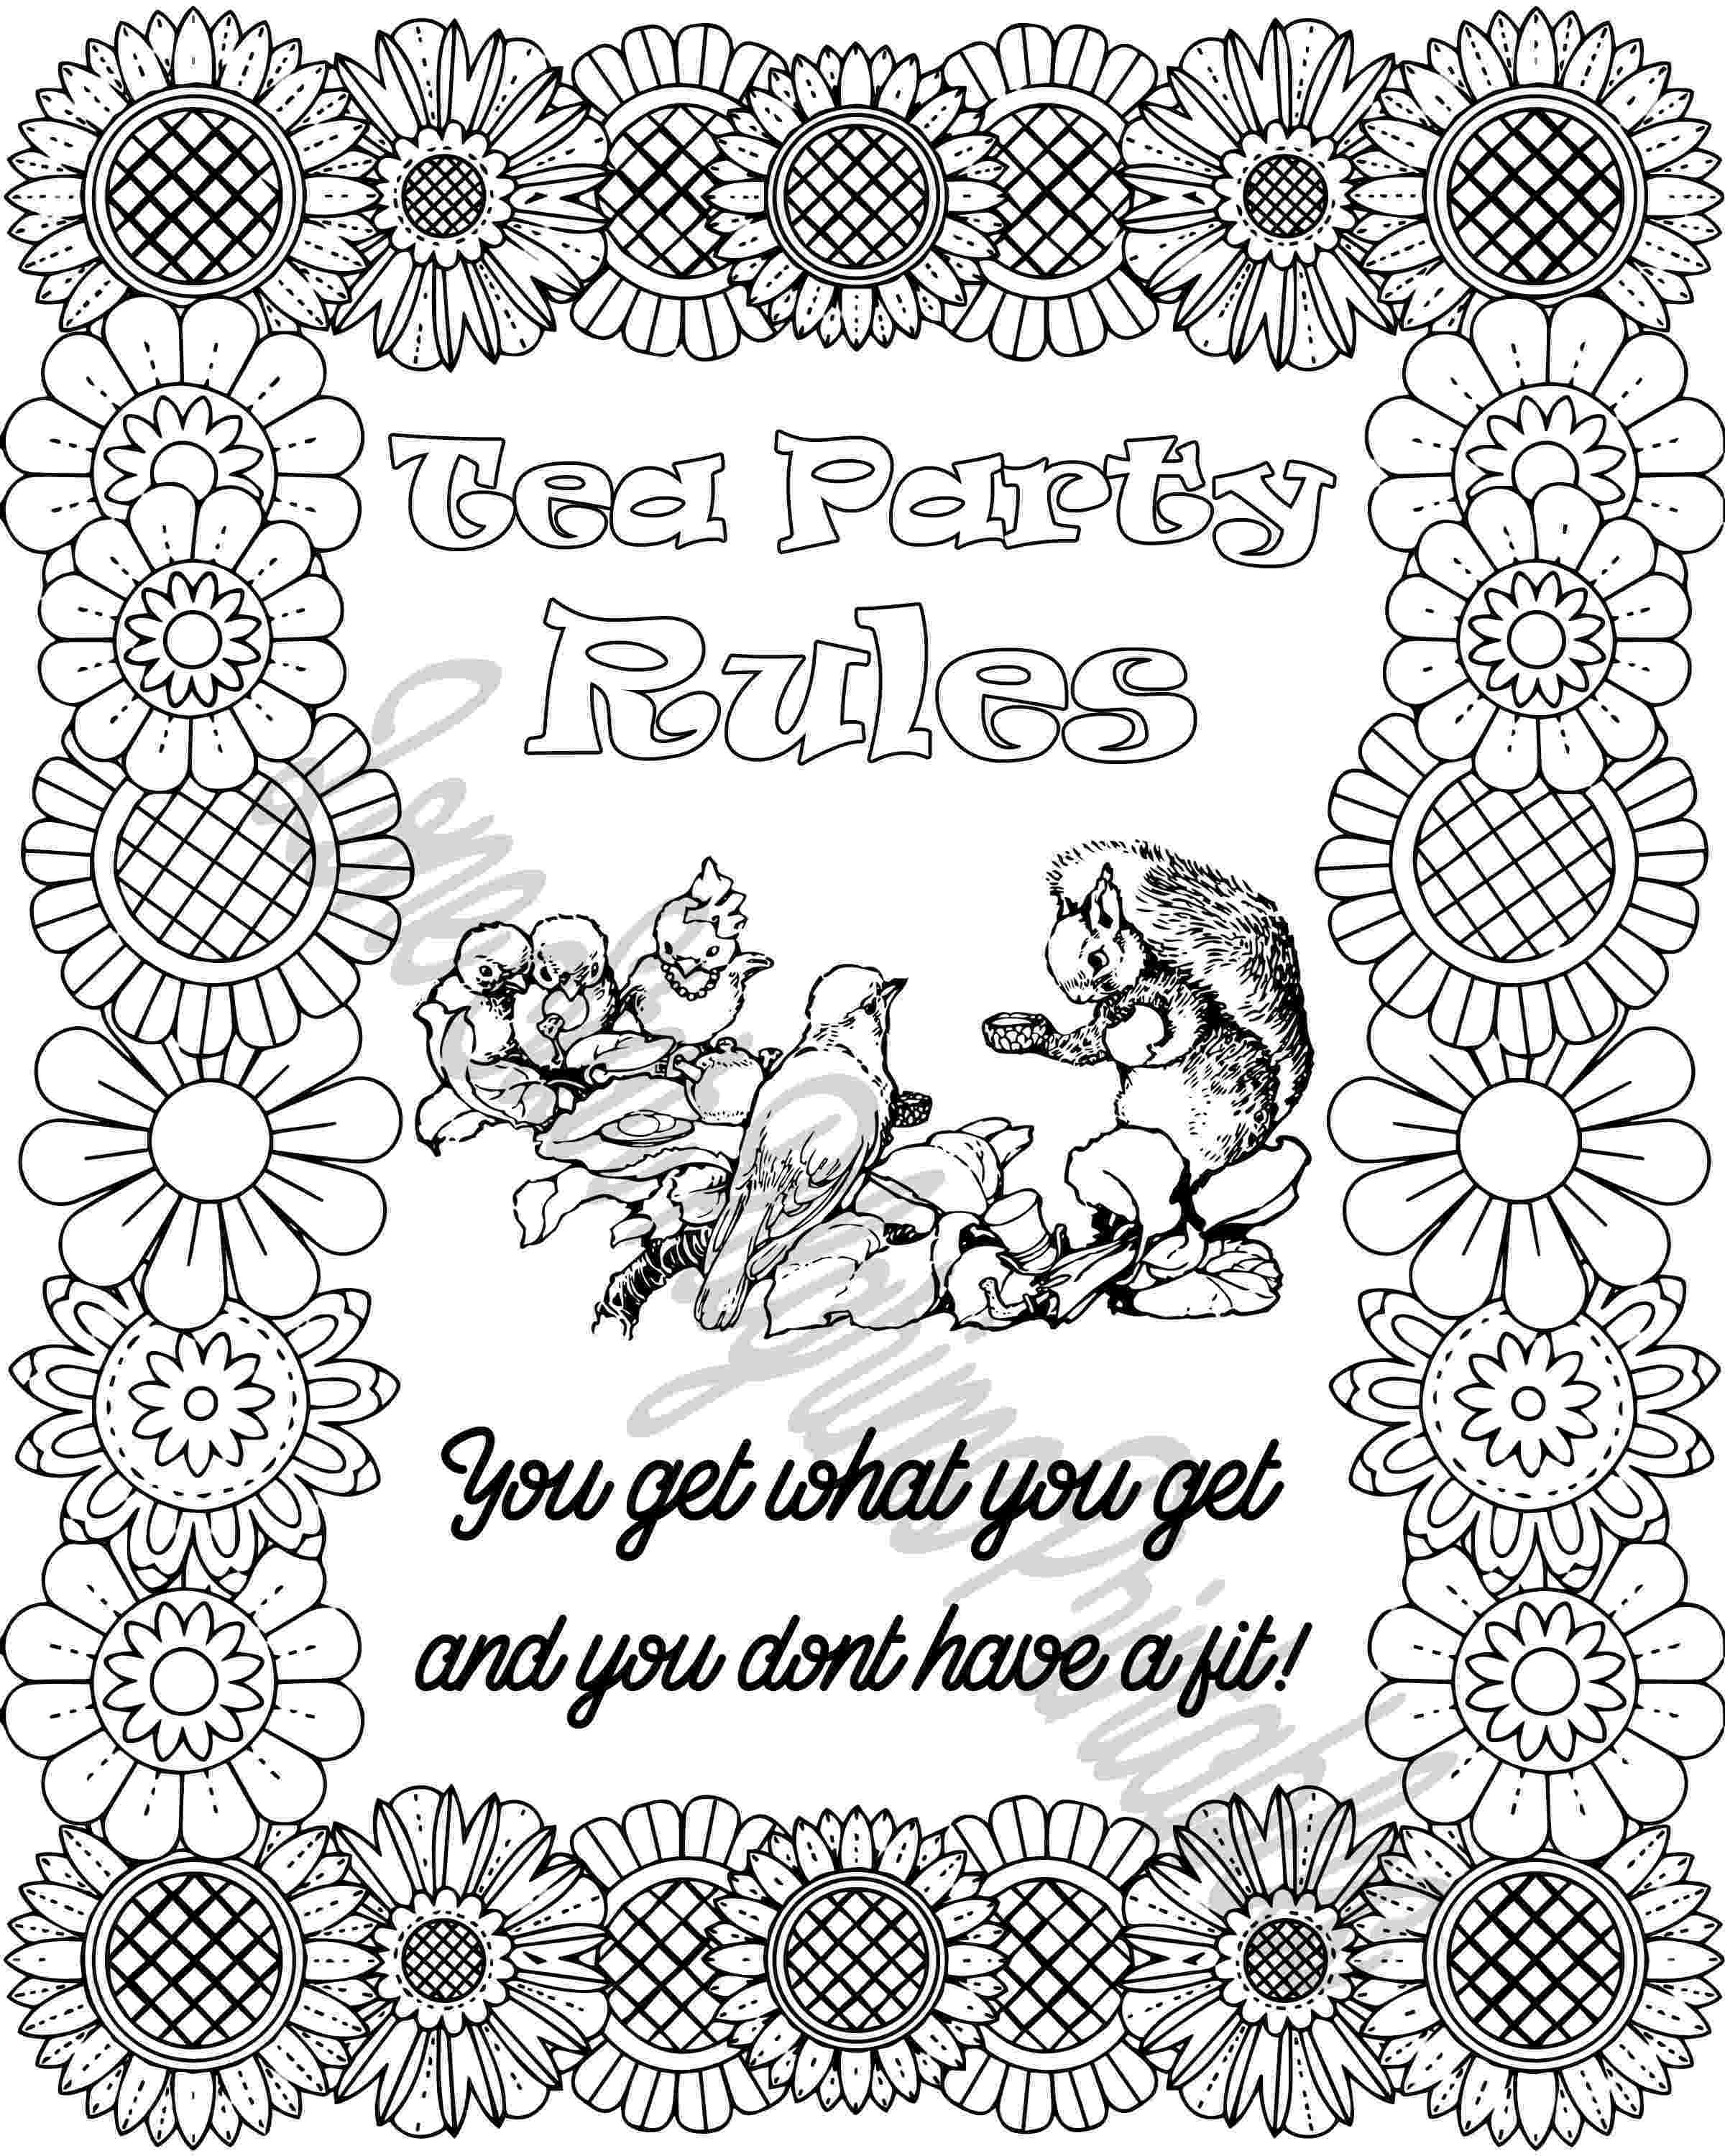 tea party coloring pages adult coloring page tea party rules coloring page 85x11 coloring party tea pages 